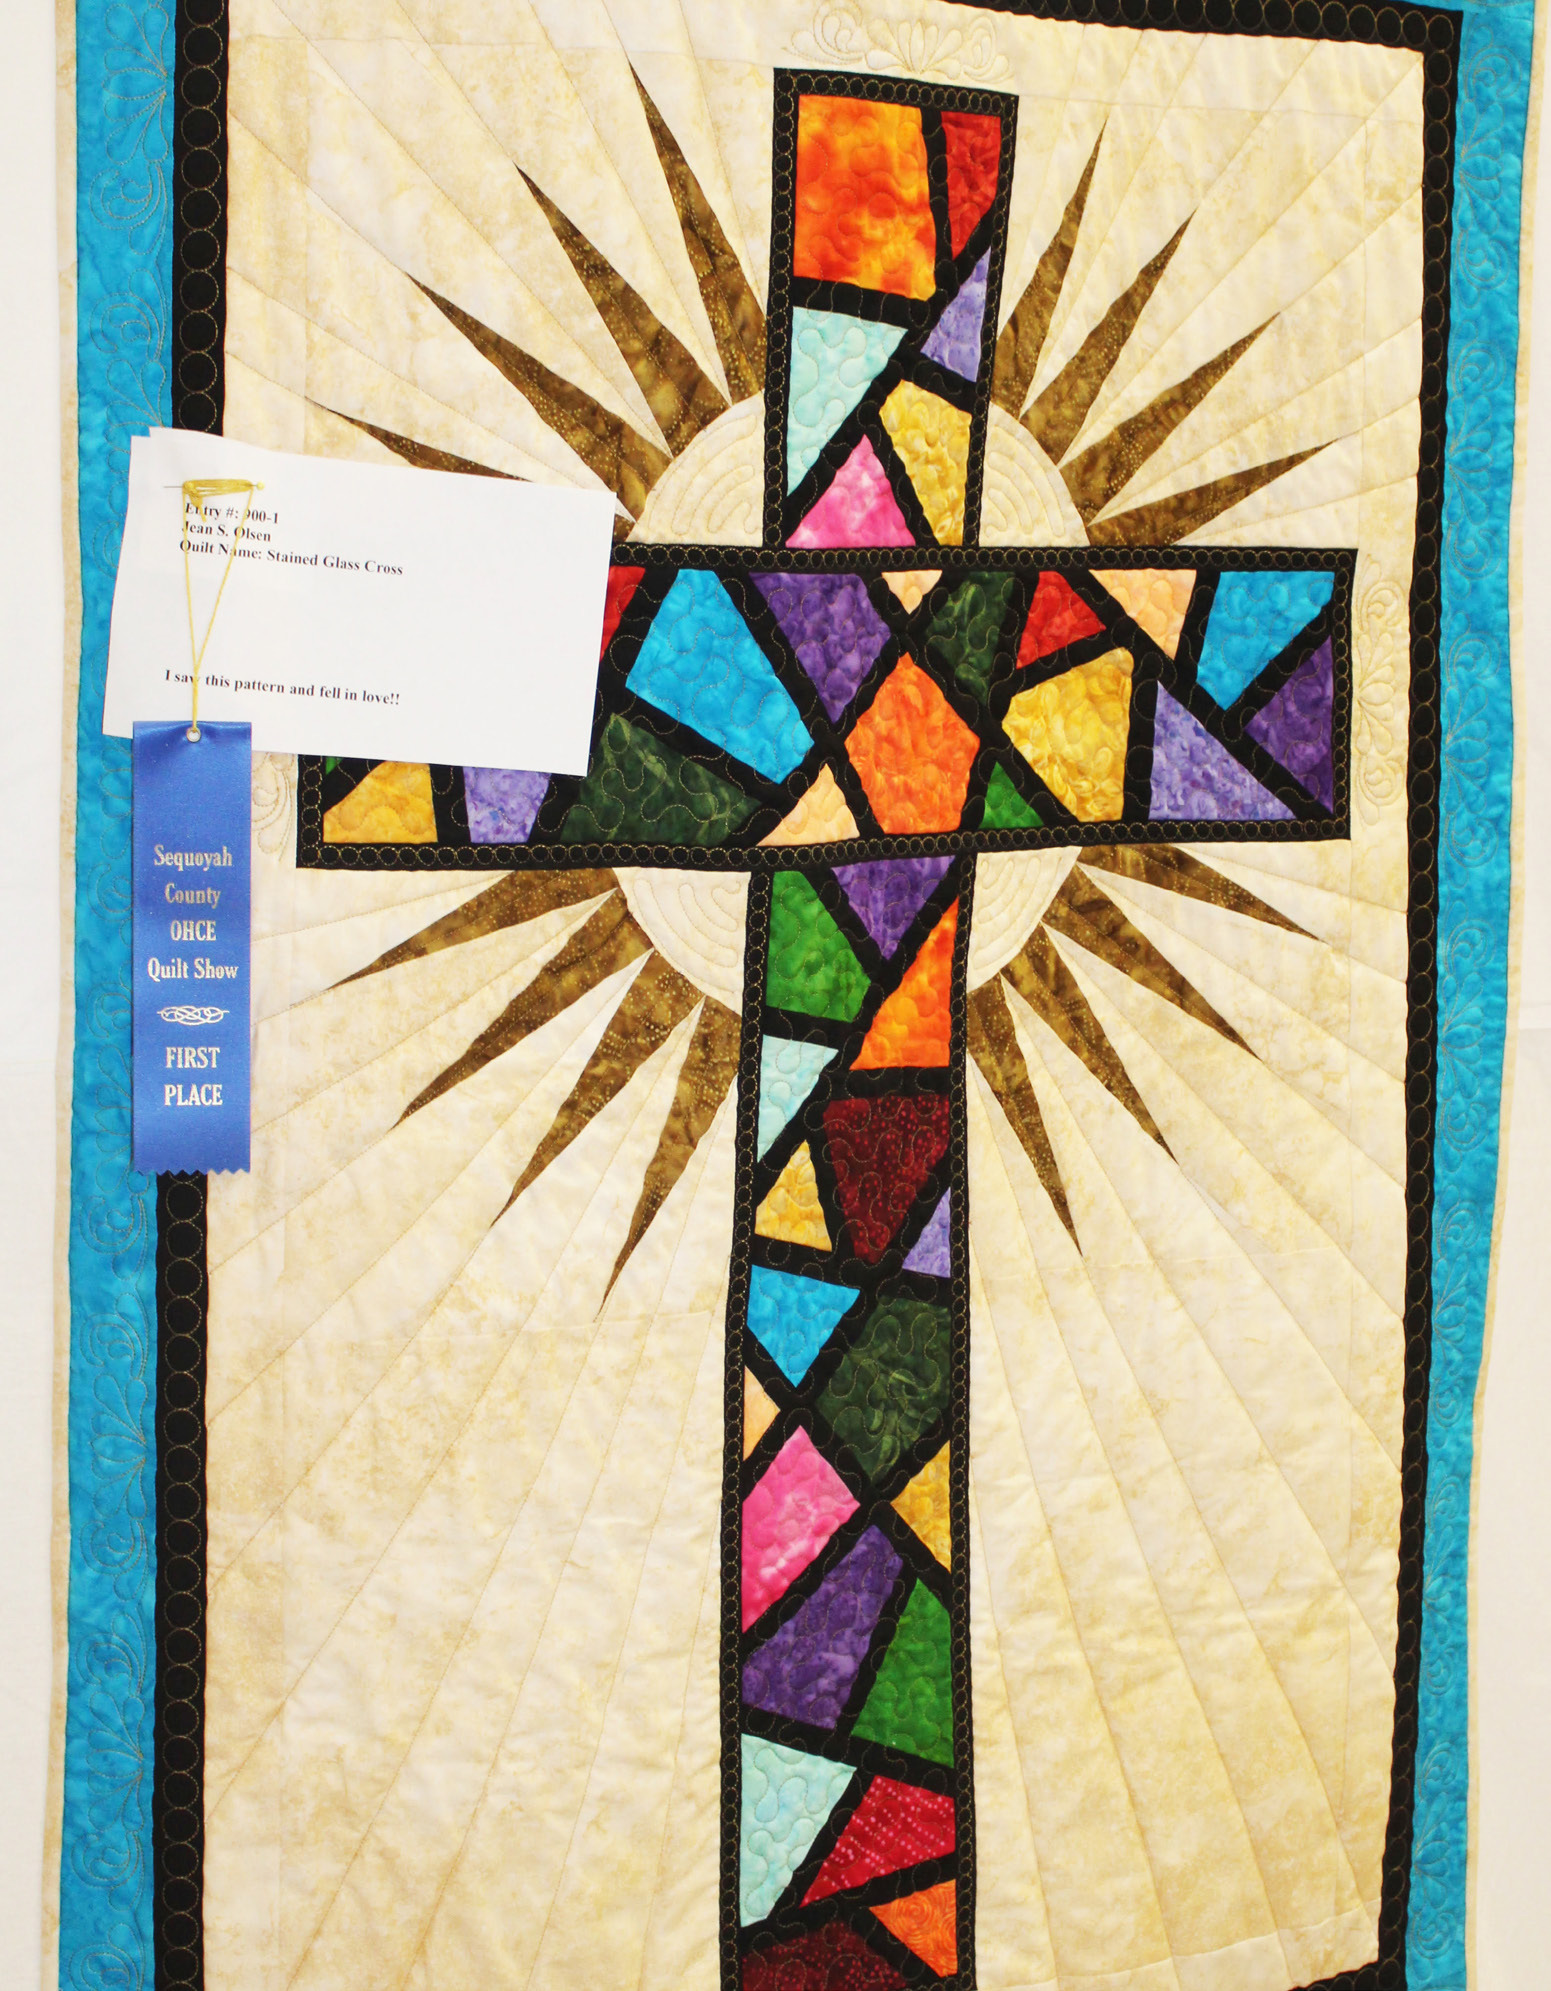 Stained glass cross received first place in the table runners, wall hangings and table topper division of the OHCE Quilt Show. Jean S. Olsen, who made the quilt, said she saw “this pattern and fell in love!”